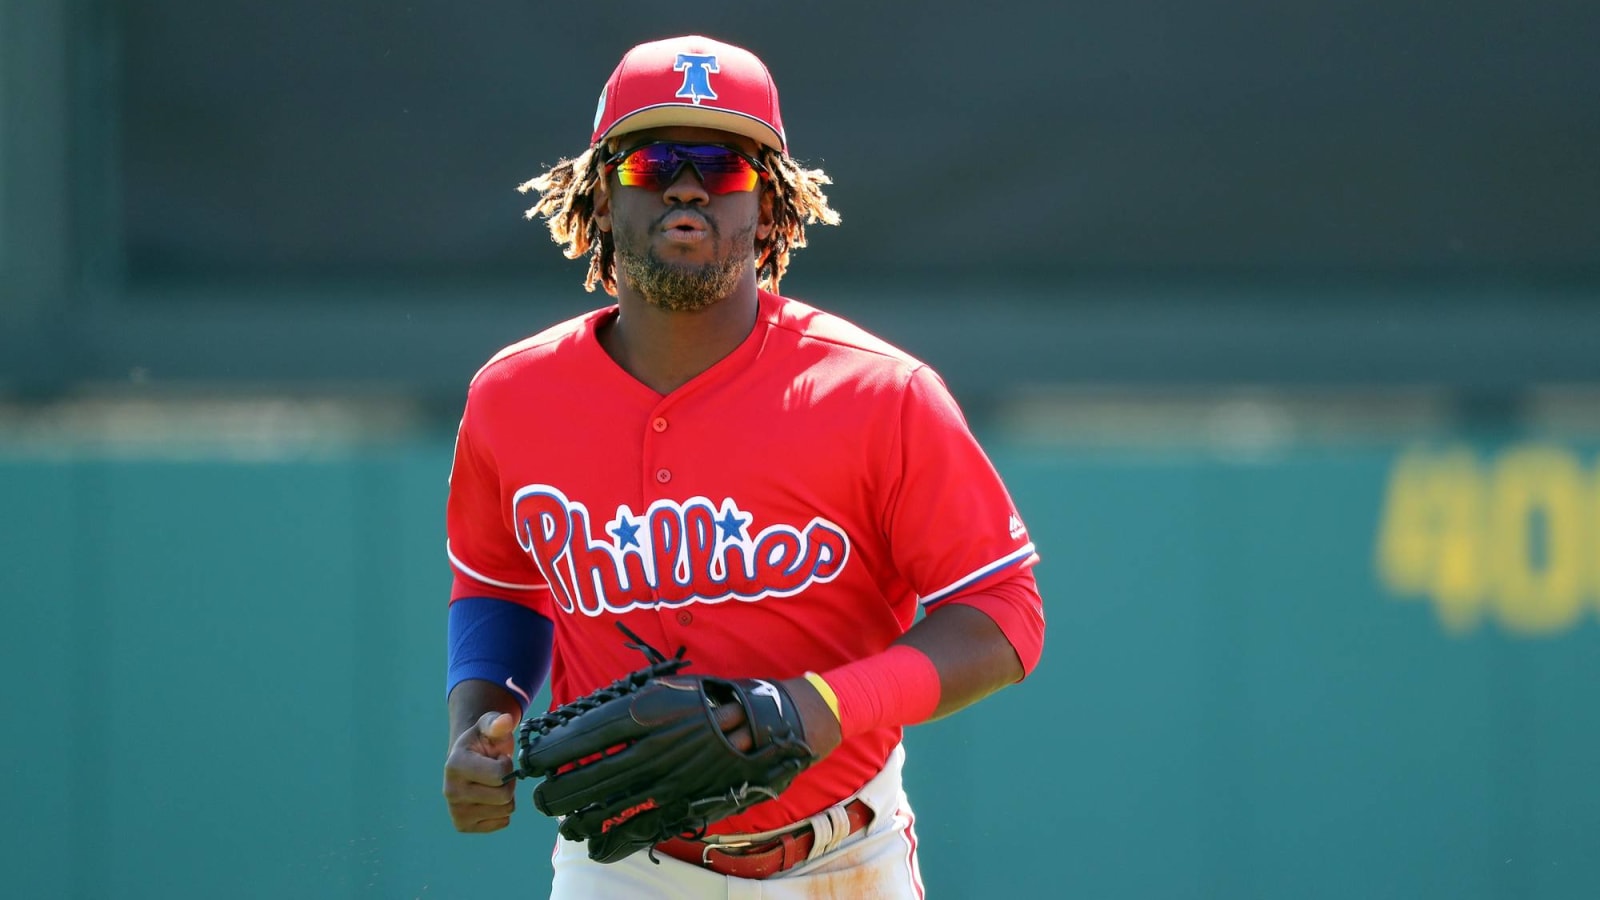 Phillies’ Odubel Herrera upset about being left out of Opening Day lineup